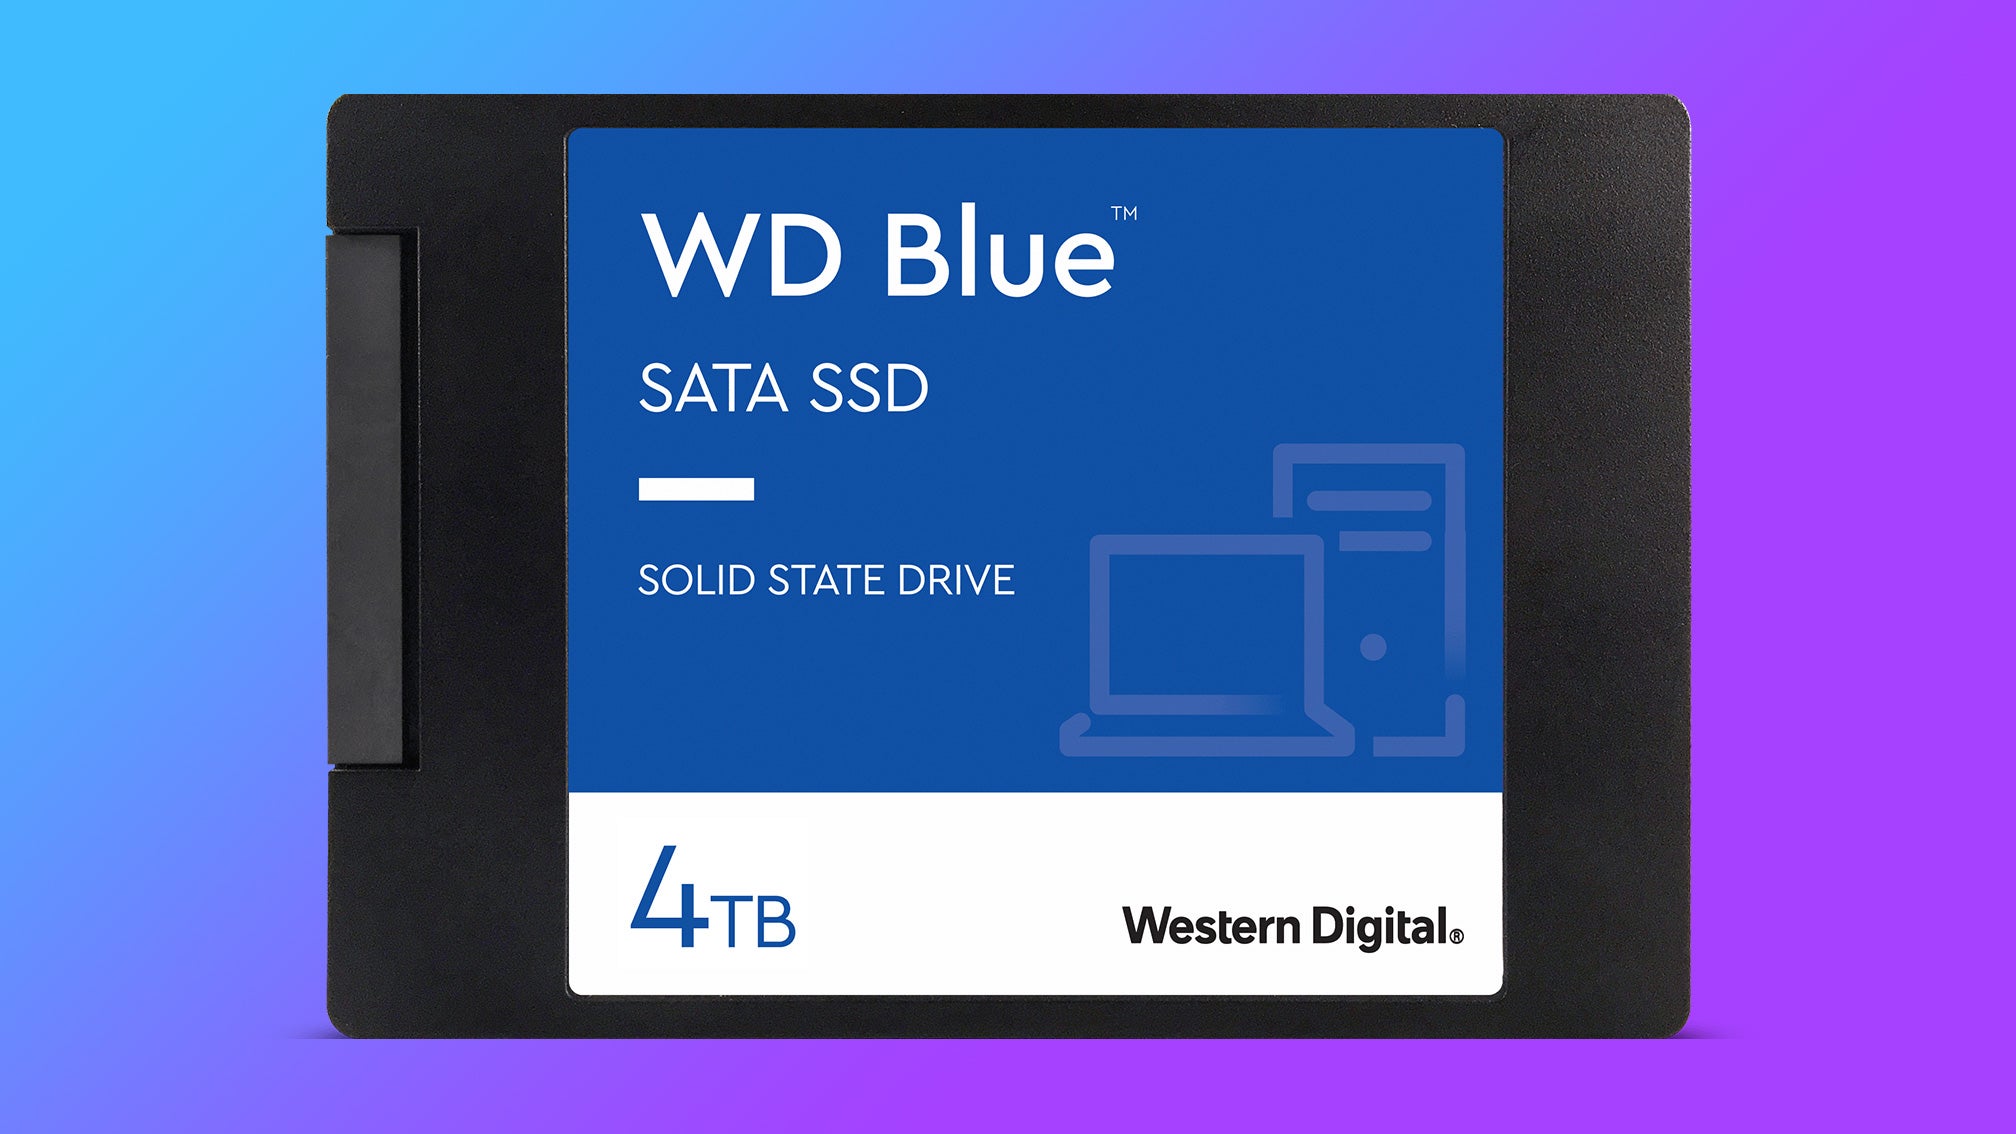 a photo of the wd blue sata ssd, with a 4tb capacity listed and the common 2.5-inch size